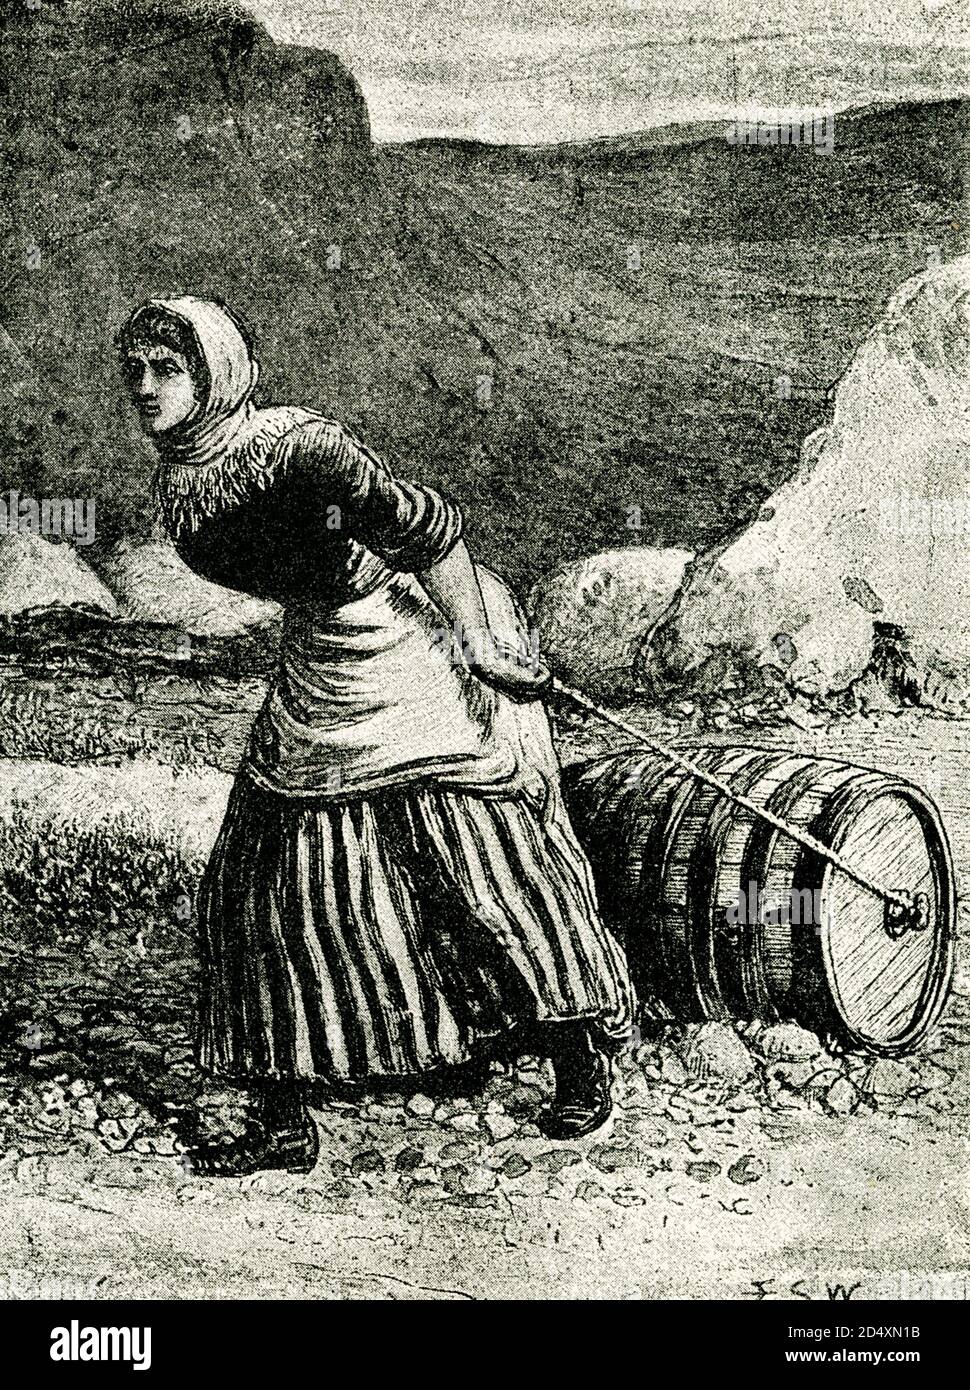 This late 1800s illustration shows a Female crofter in Scotland. Crofters are people who live and work on croft land. Usually they are tenants of the person who owns the land (this is the true legal meaning of the word crofter), but, in recent times, some crofters have bought their crofts and become owner-occupiers. Crofting activities include crofting activities: cutting peat, winnowing corn, manuring fields. Stock Photo